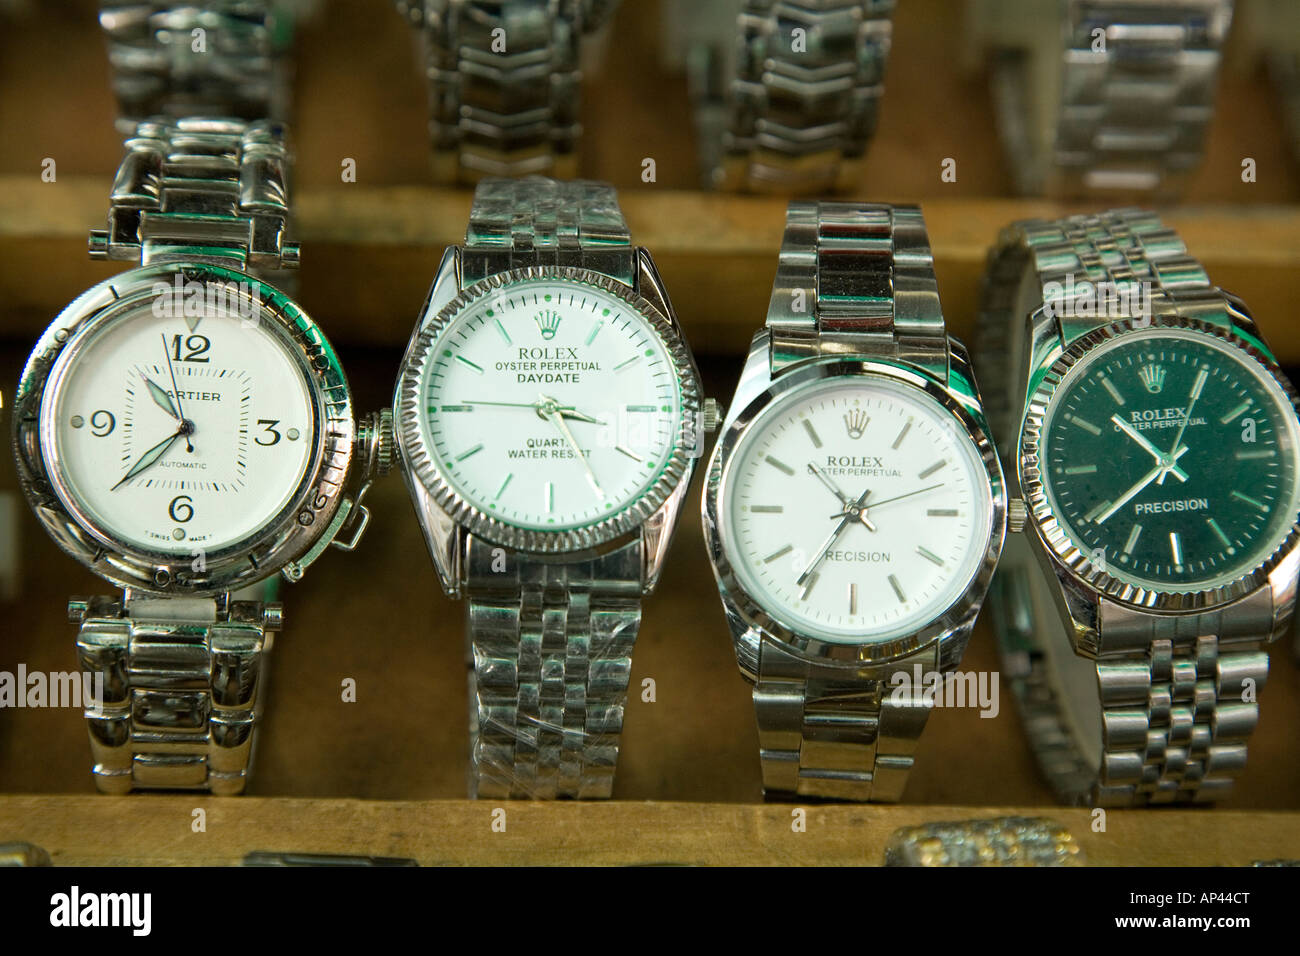 Watches on sale at the Petaling Street 